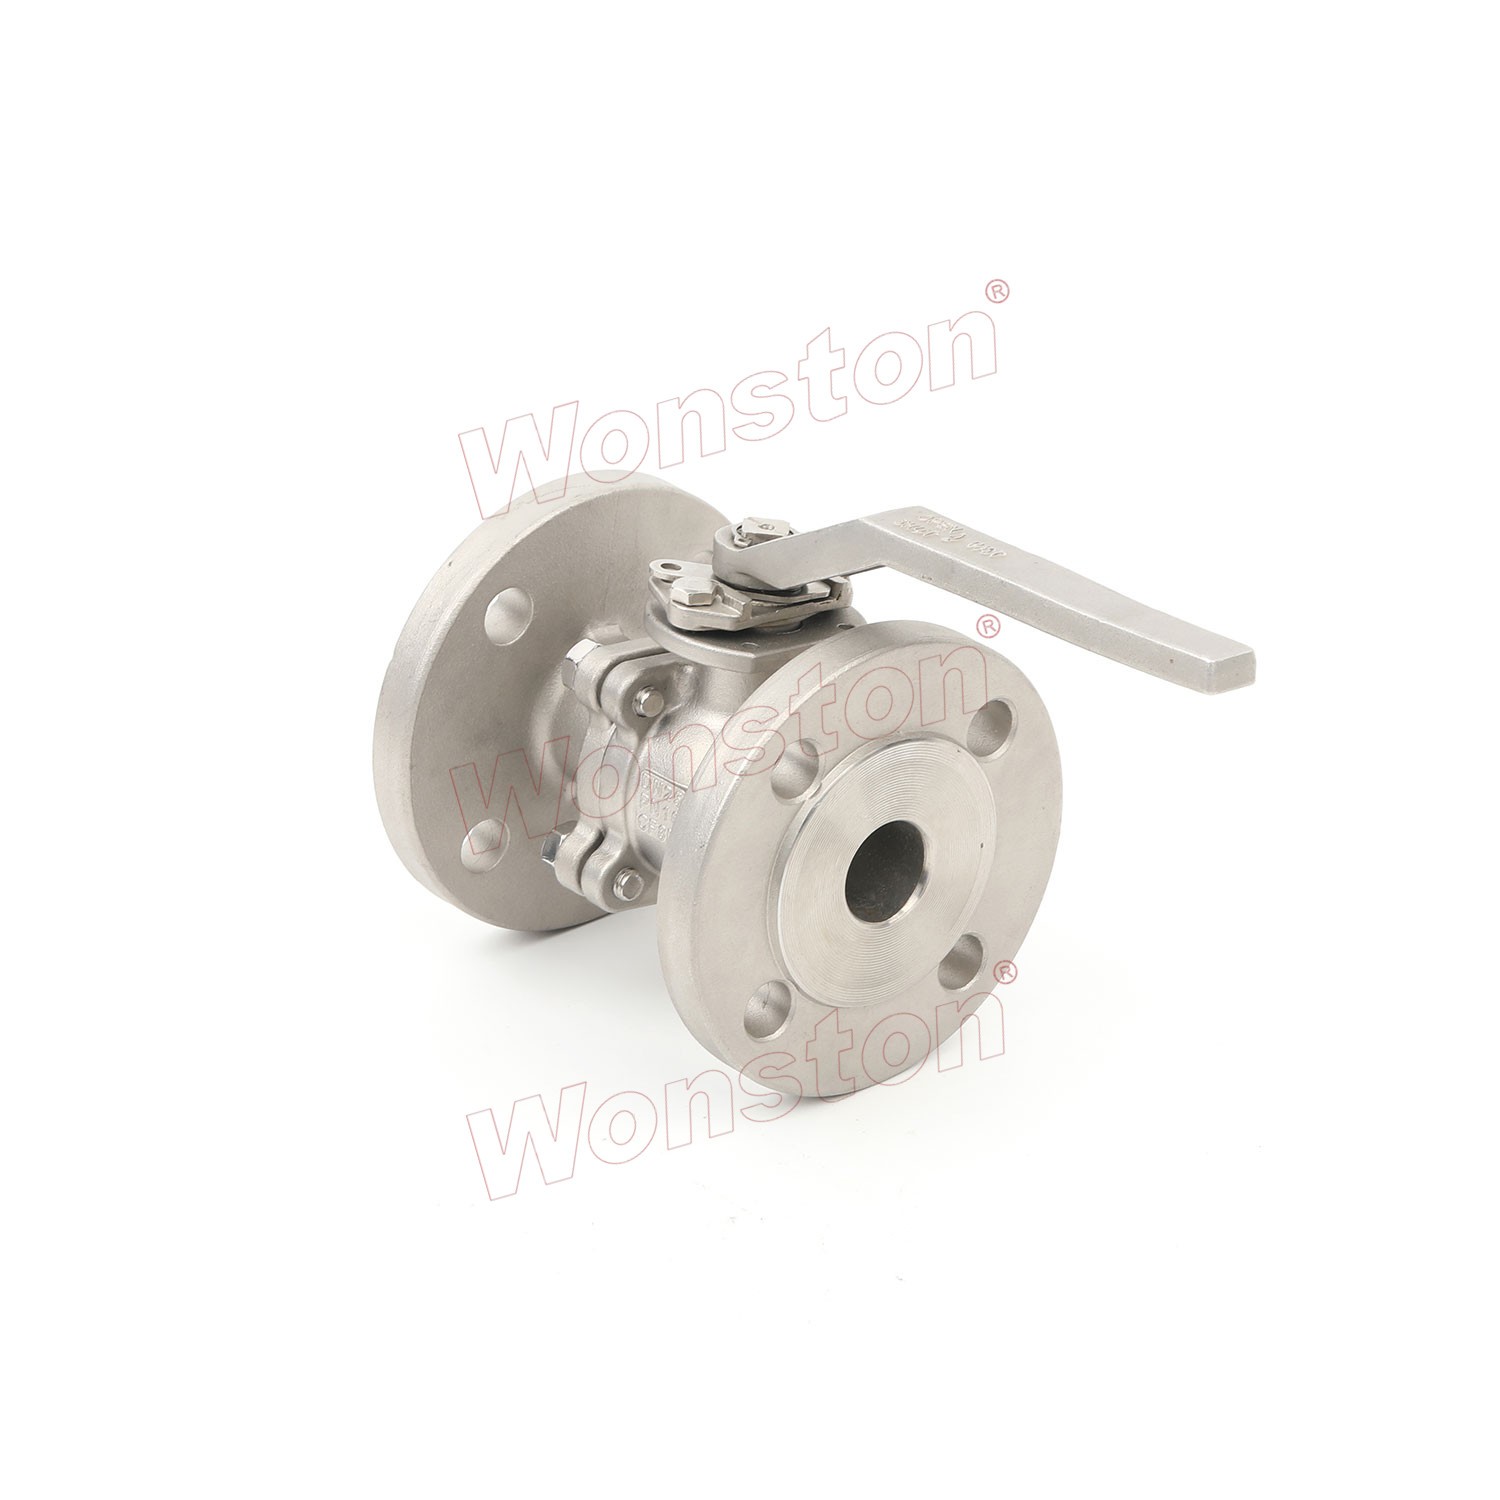 2PC Ball Valve Flanged End With Mounting Pad DIN Type